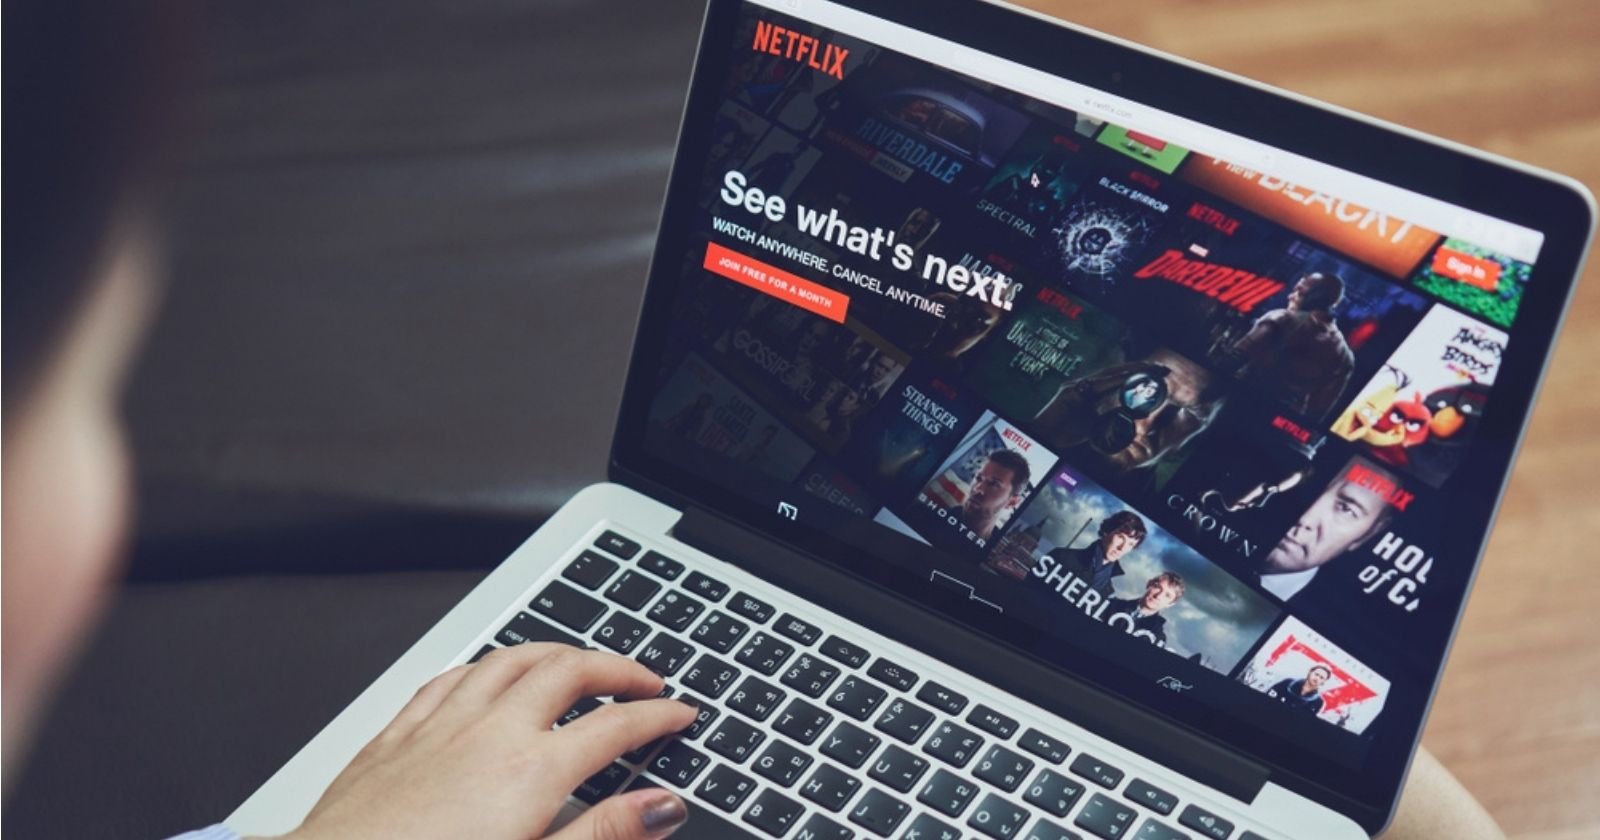 This co-subscription platform allows you to share your Netflix and Spotify accounts